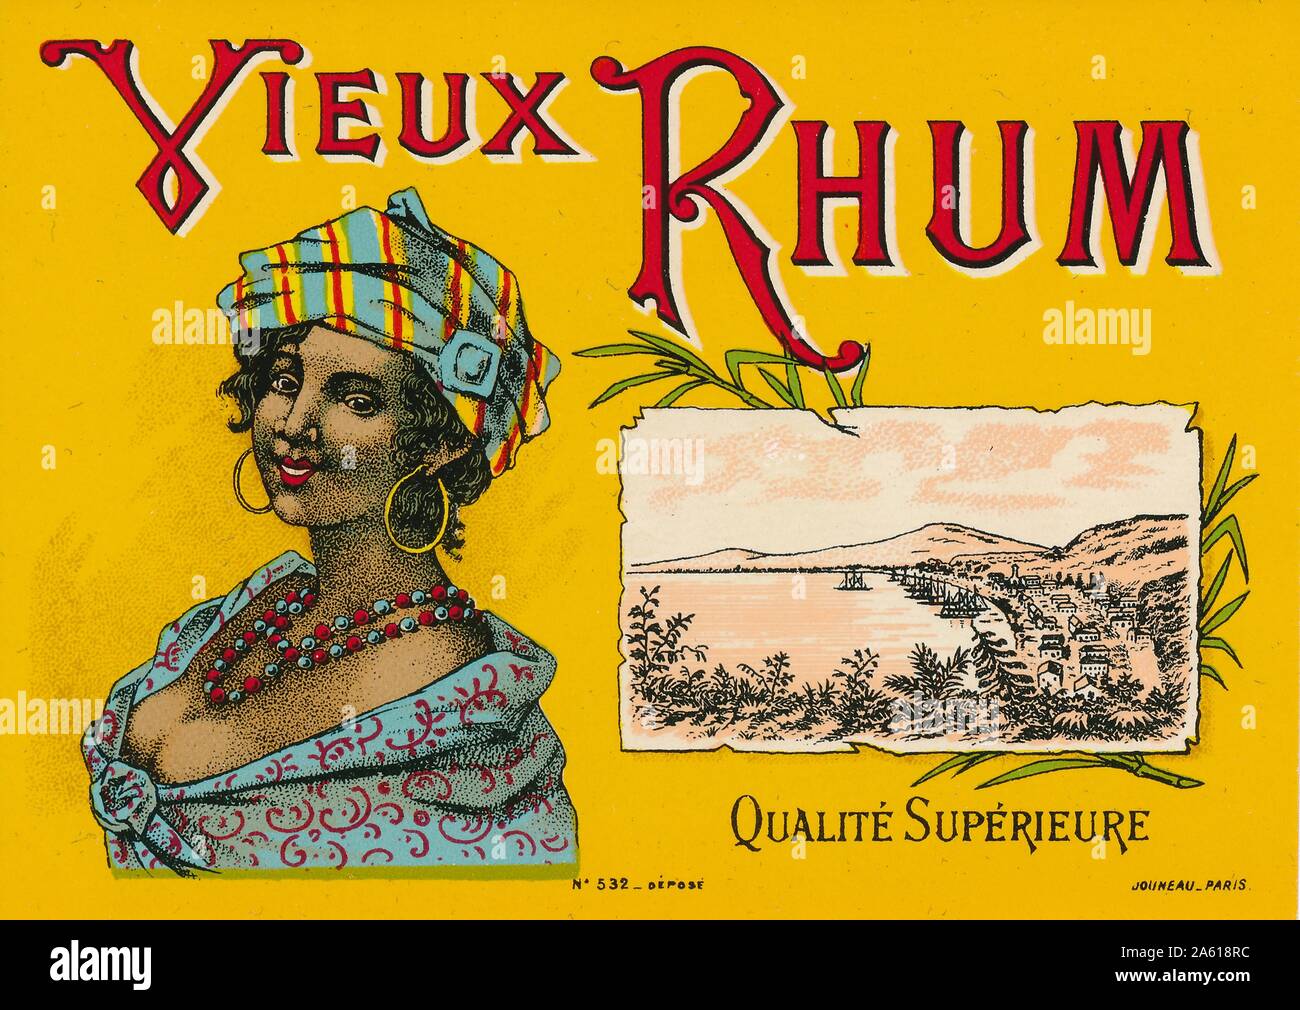 Label from a bottle of Martinique cane rum with the text 'Vieux Rhum, ' a profile bust illustration of a smiling, turbaned woman, and a landscape sketch of a Caribbean harbor, produced by Jouneau, Paris, France, 1935. () Stock Photo